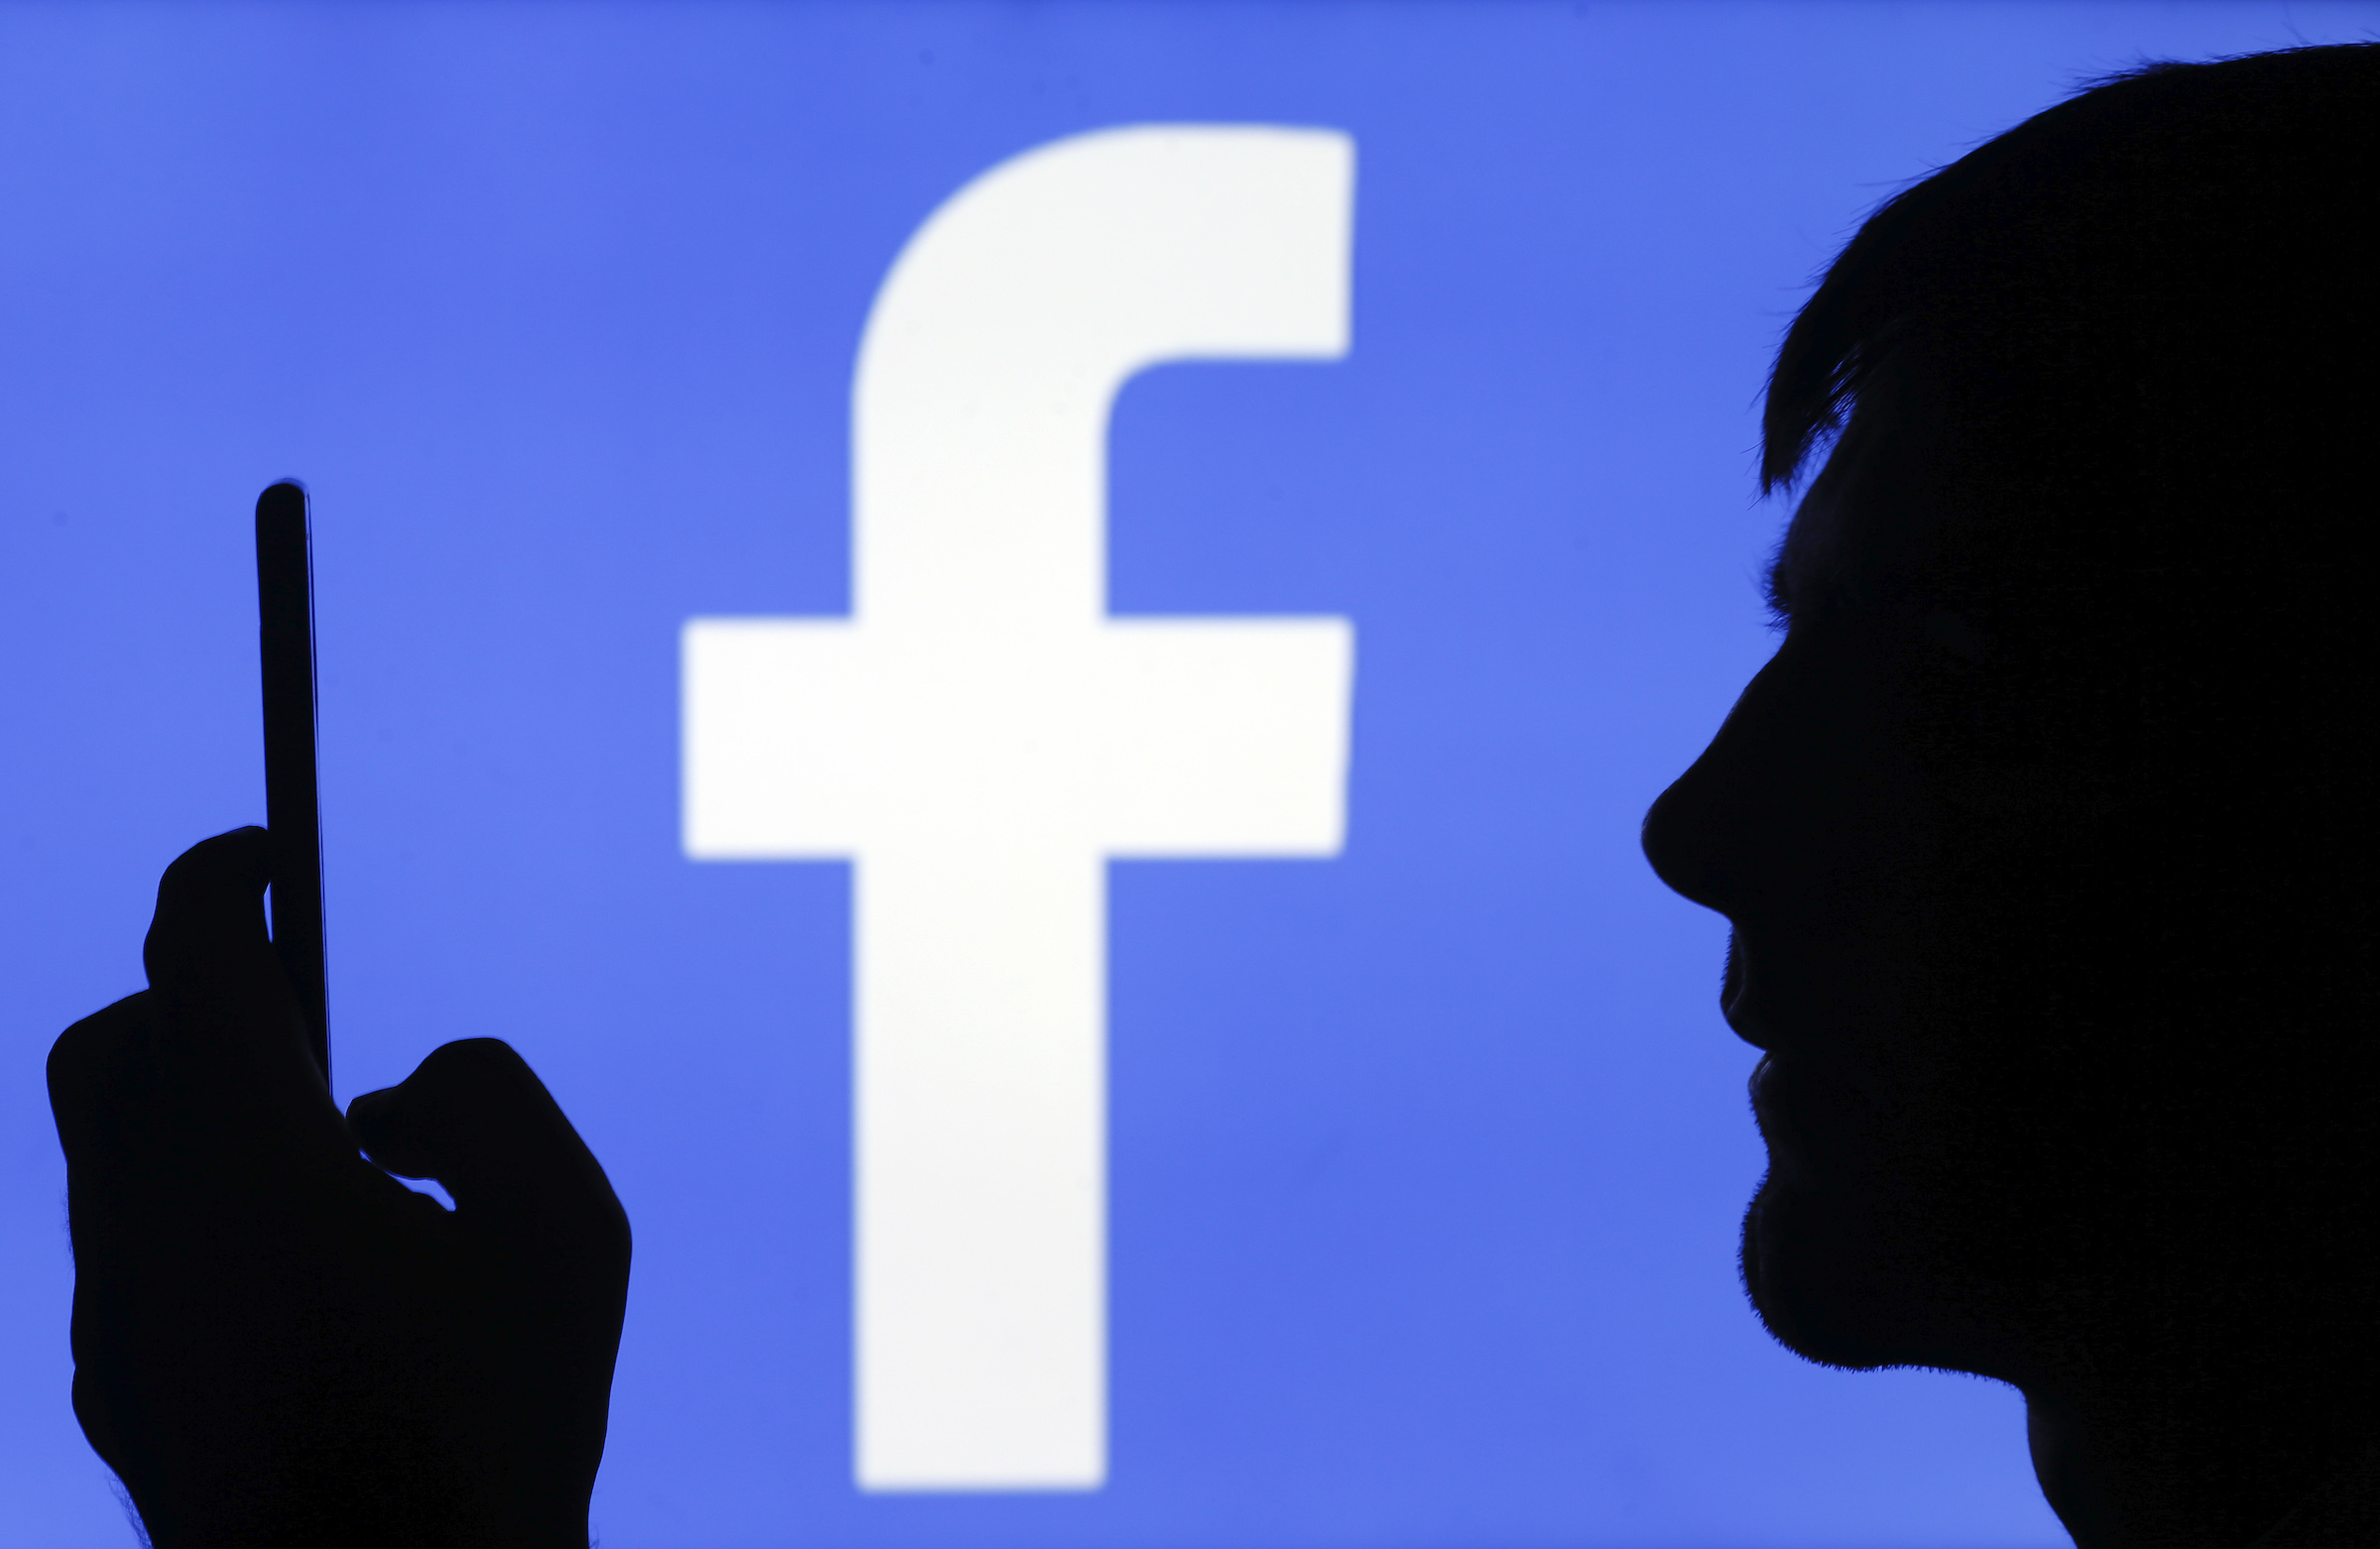 In this photo illustration, the Facebook logo is displayed on a TV screen on September 09, 2019 in Paris, France. (Chesnot/Getty Images)